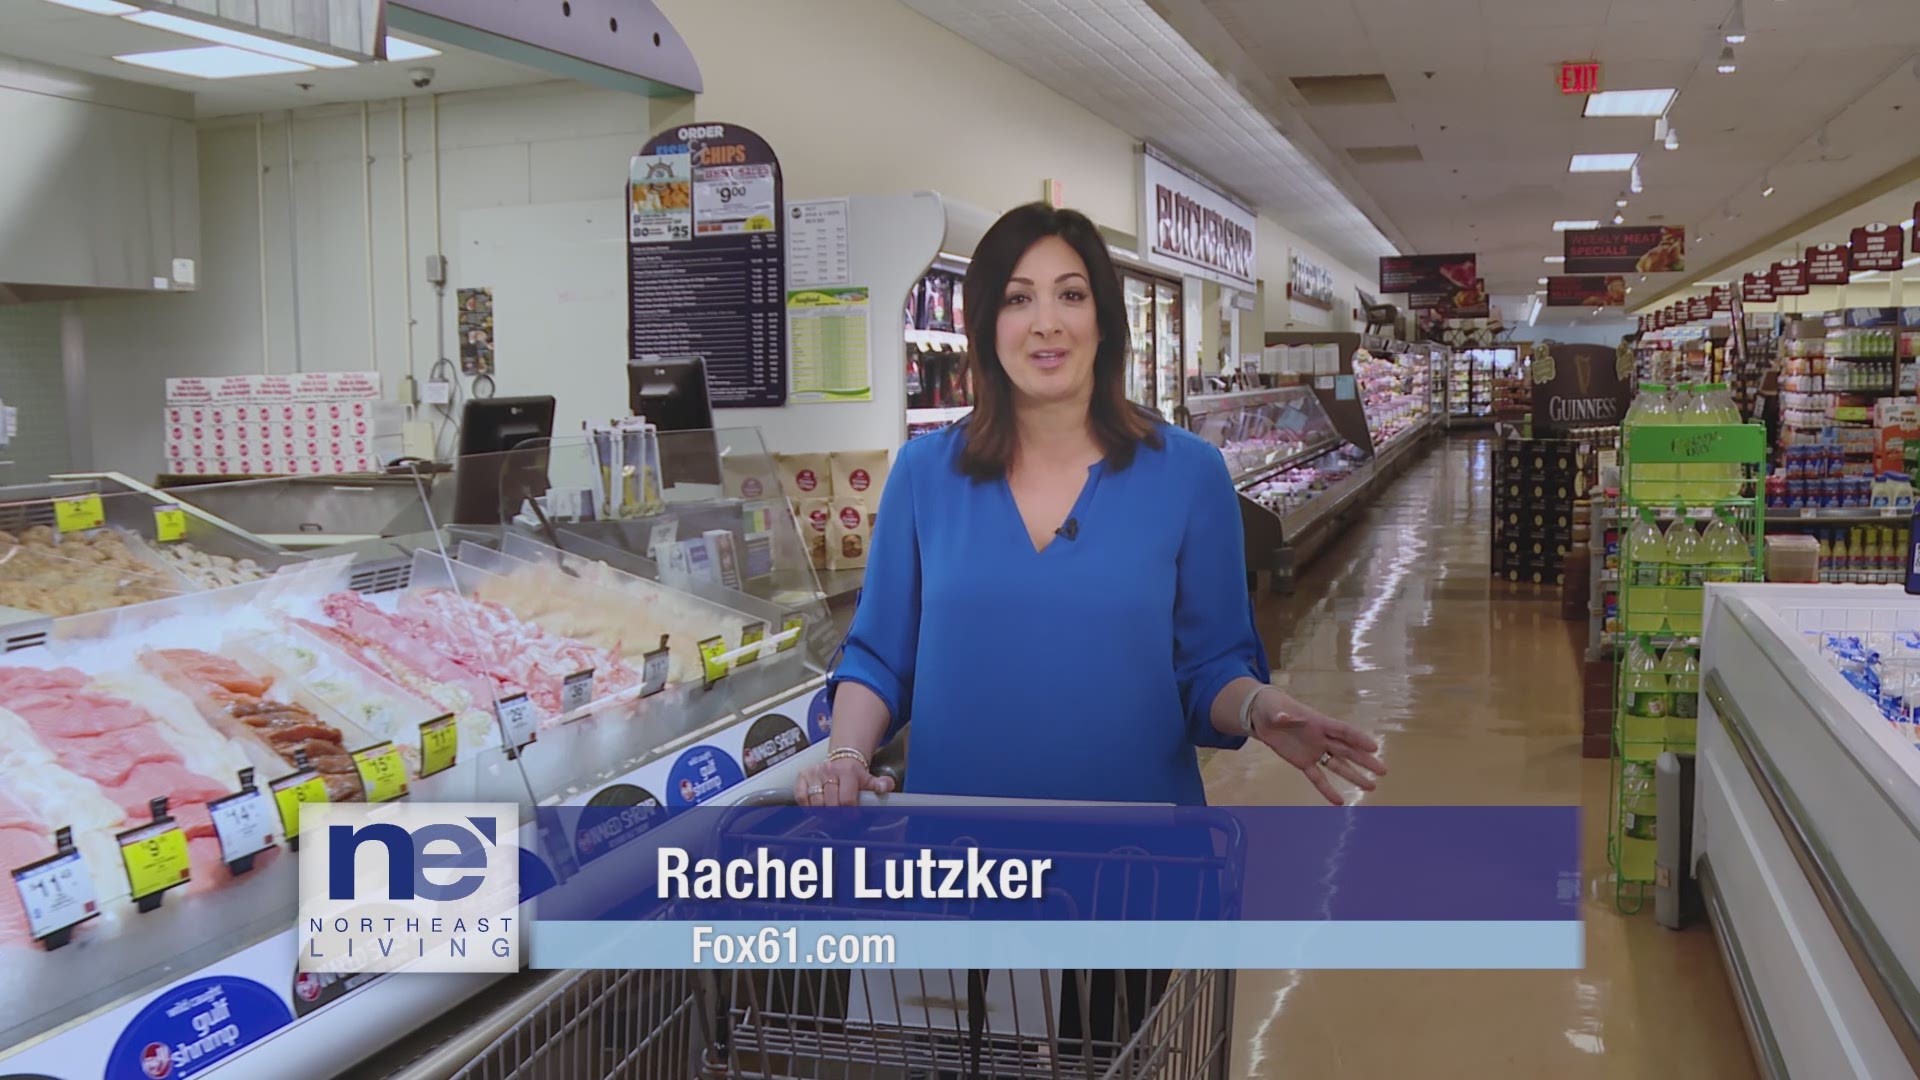 Rachel Lutzker takes you on a shopping trip at Big Y World Class Market where you can enjoy their fresh seafood or pick up healthy meals on the go.